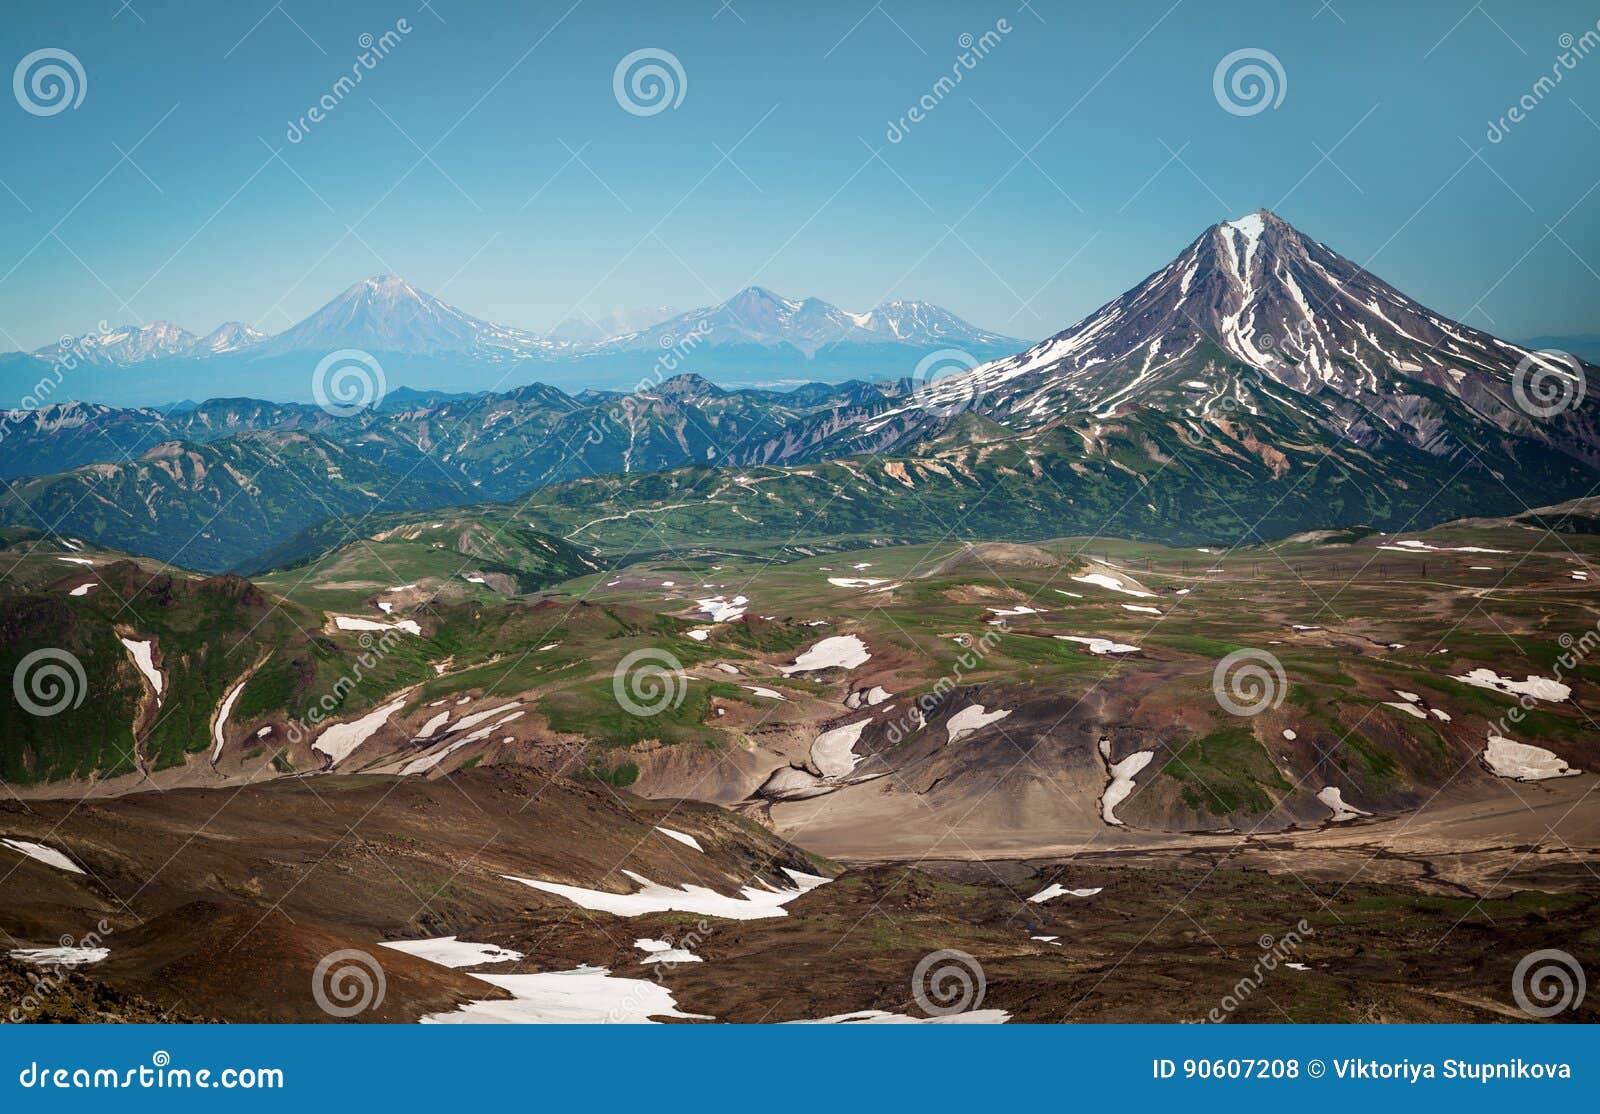 volcanoes of kamchatka on the palm of your hand